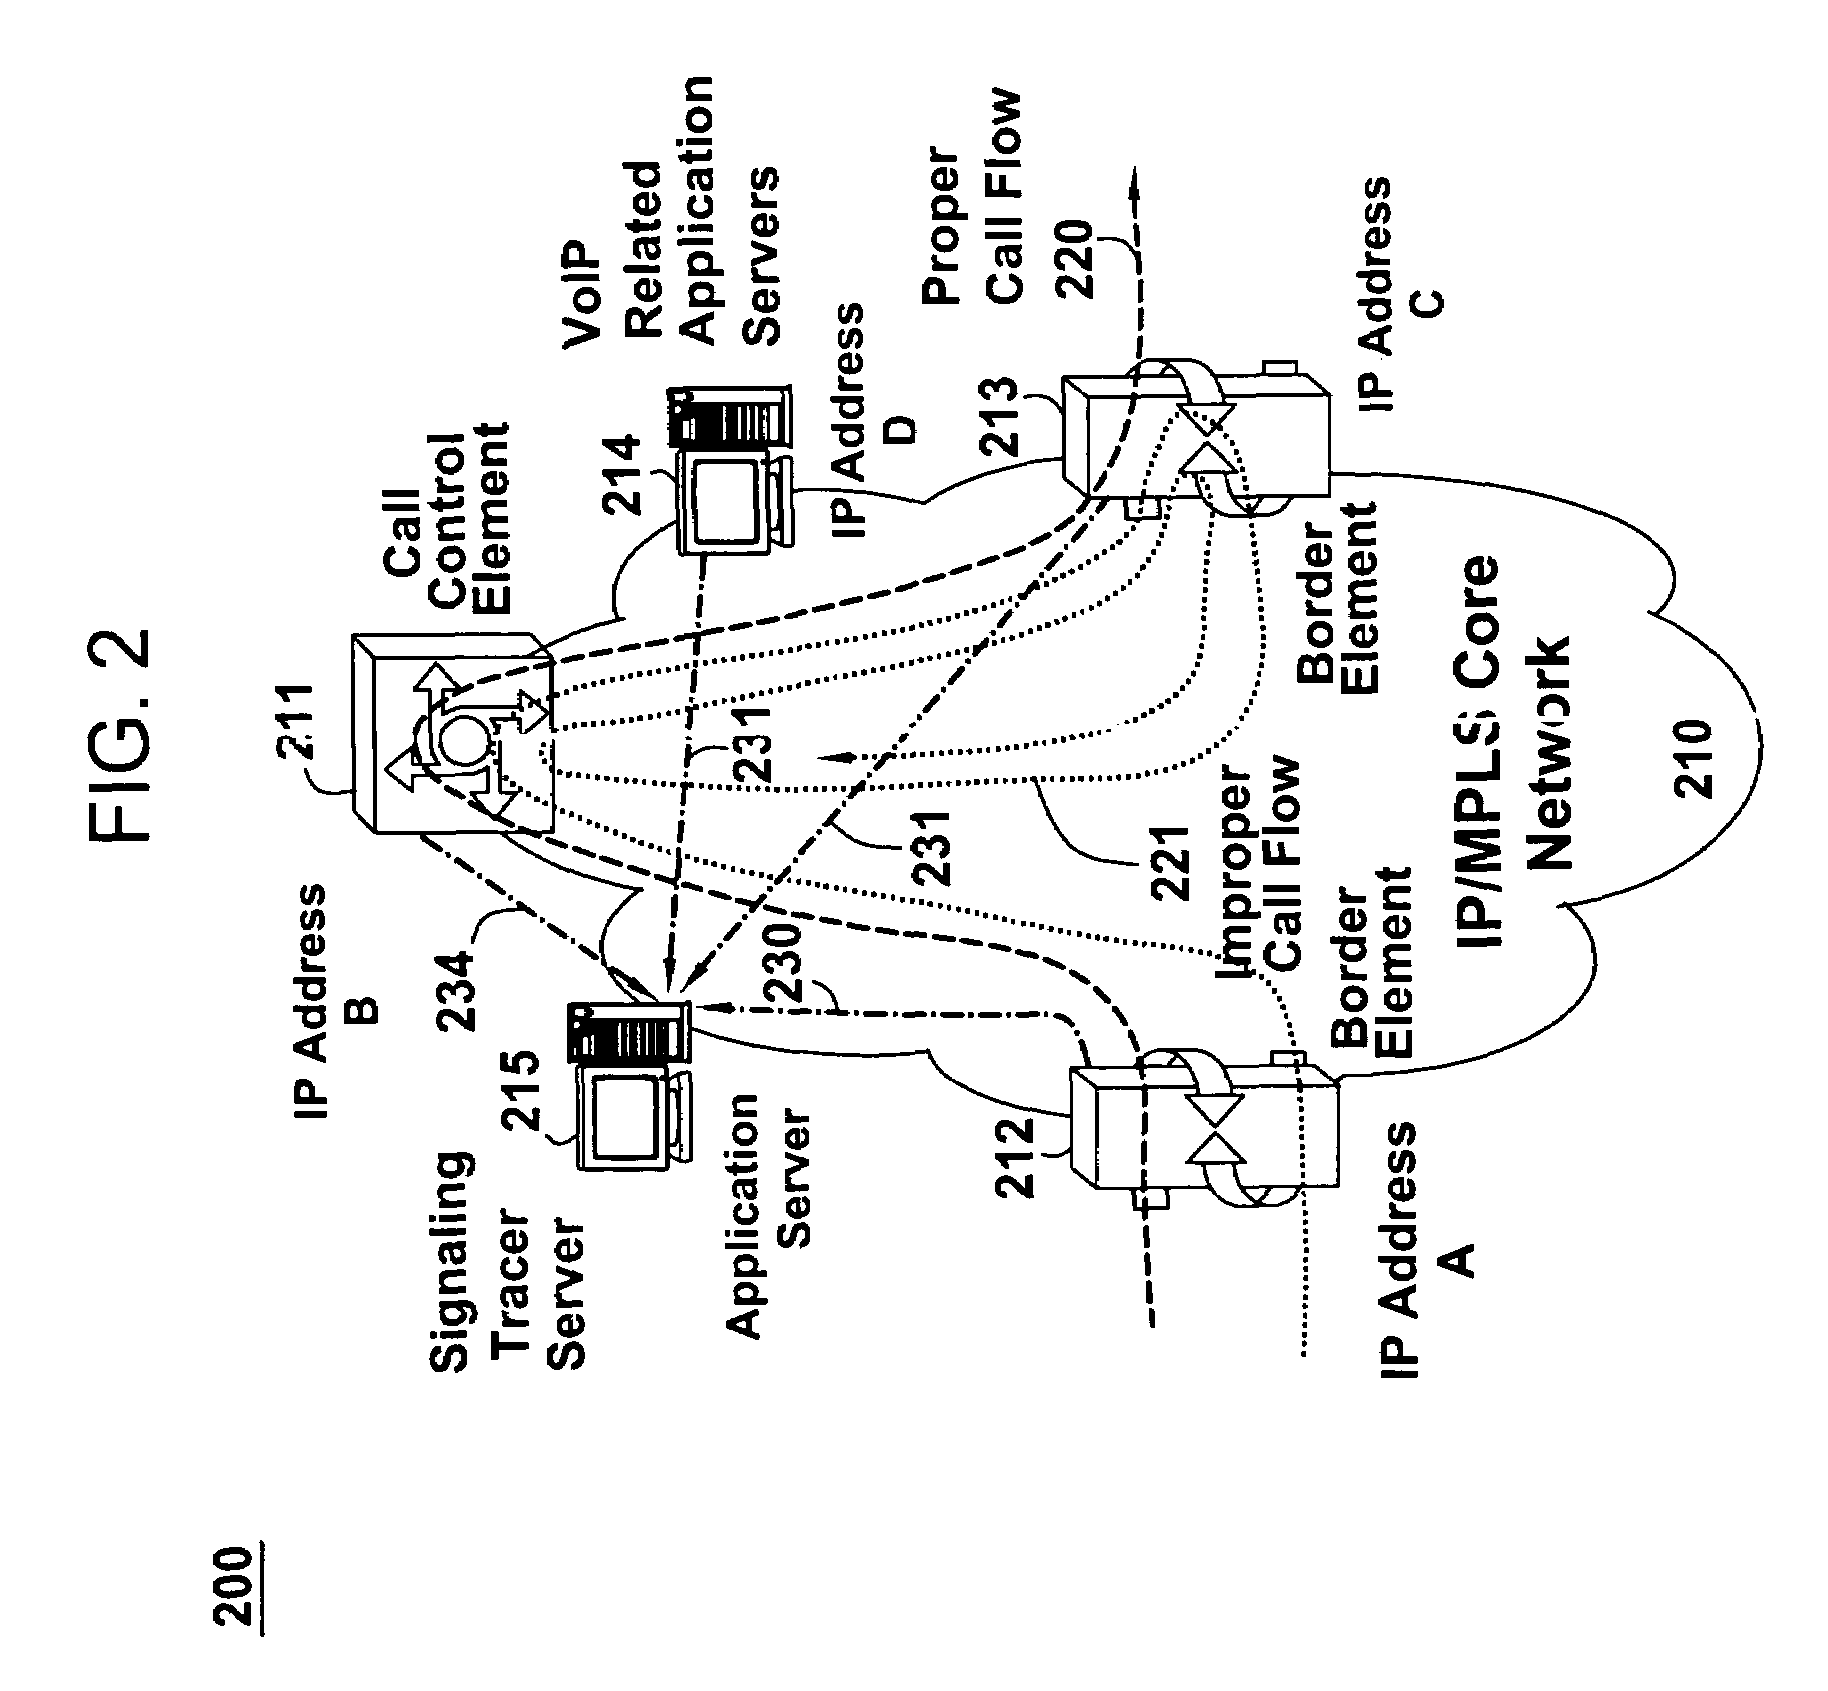 Method and apparatus for graphically displaying call signaling flows in a network